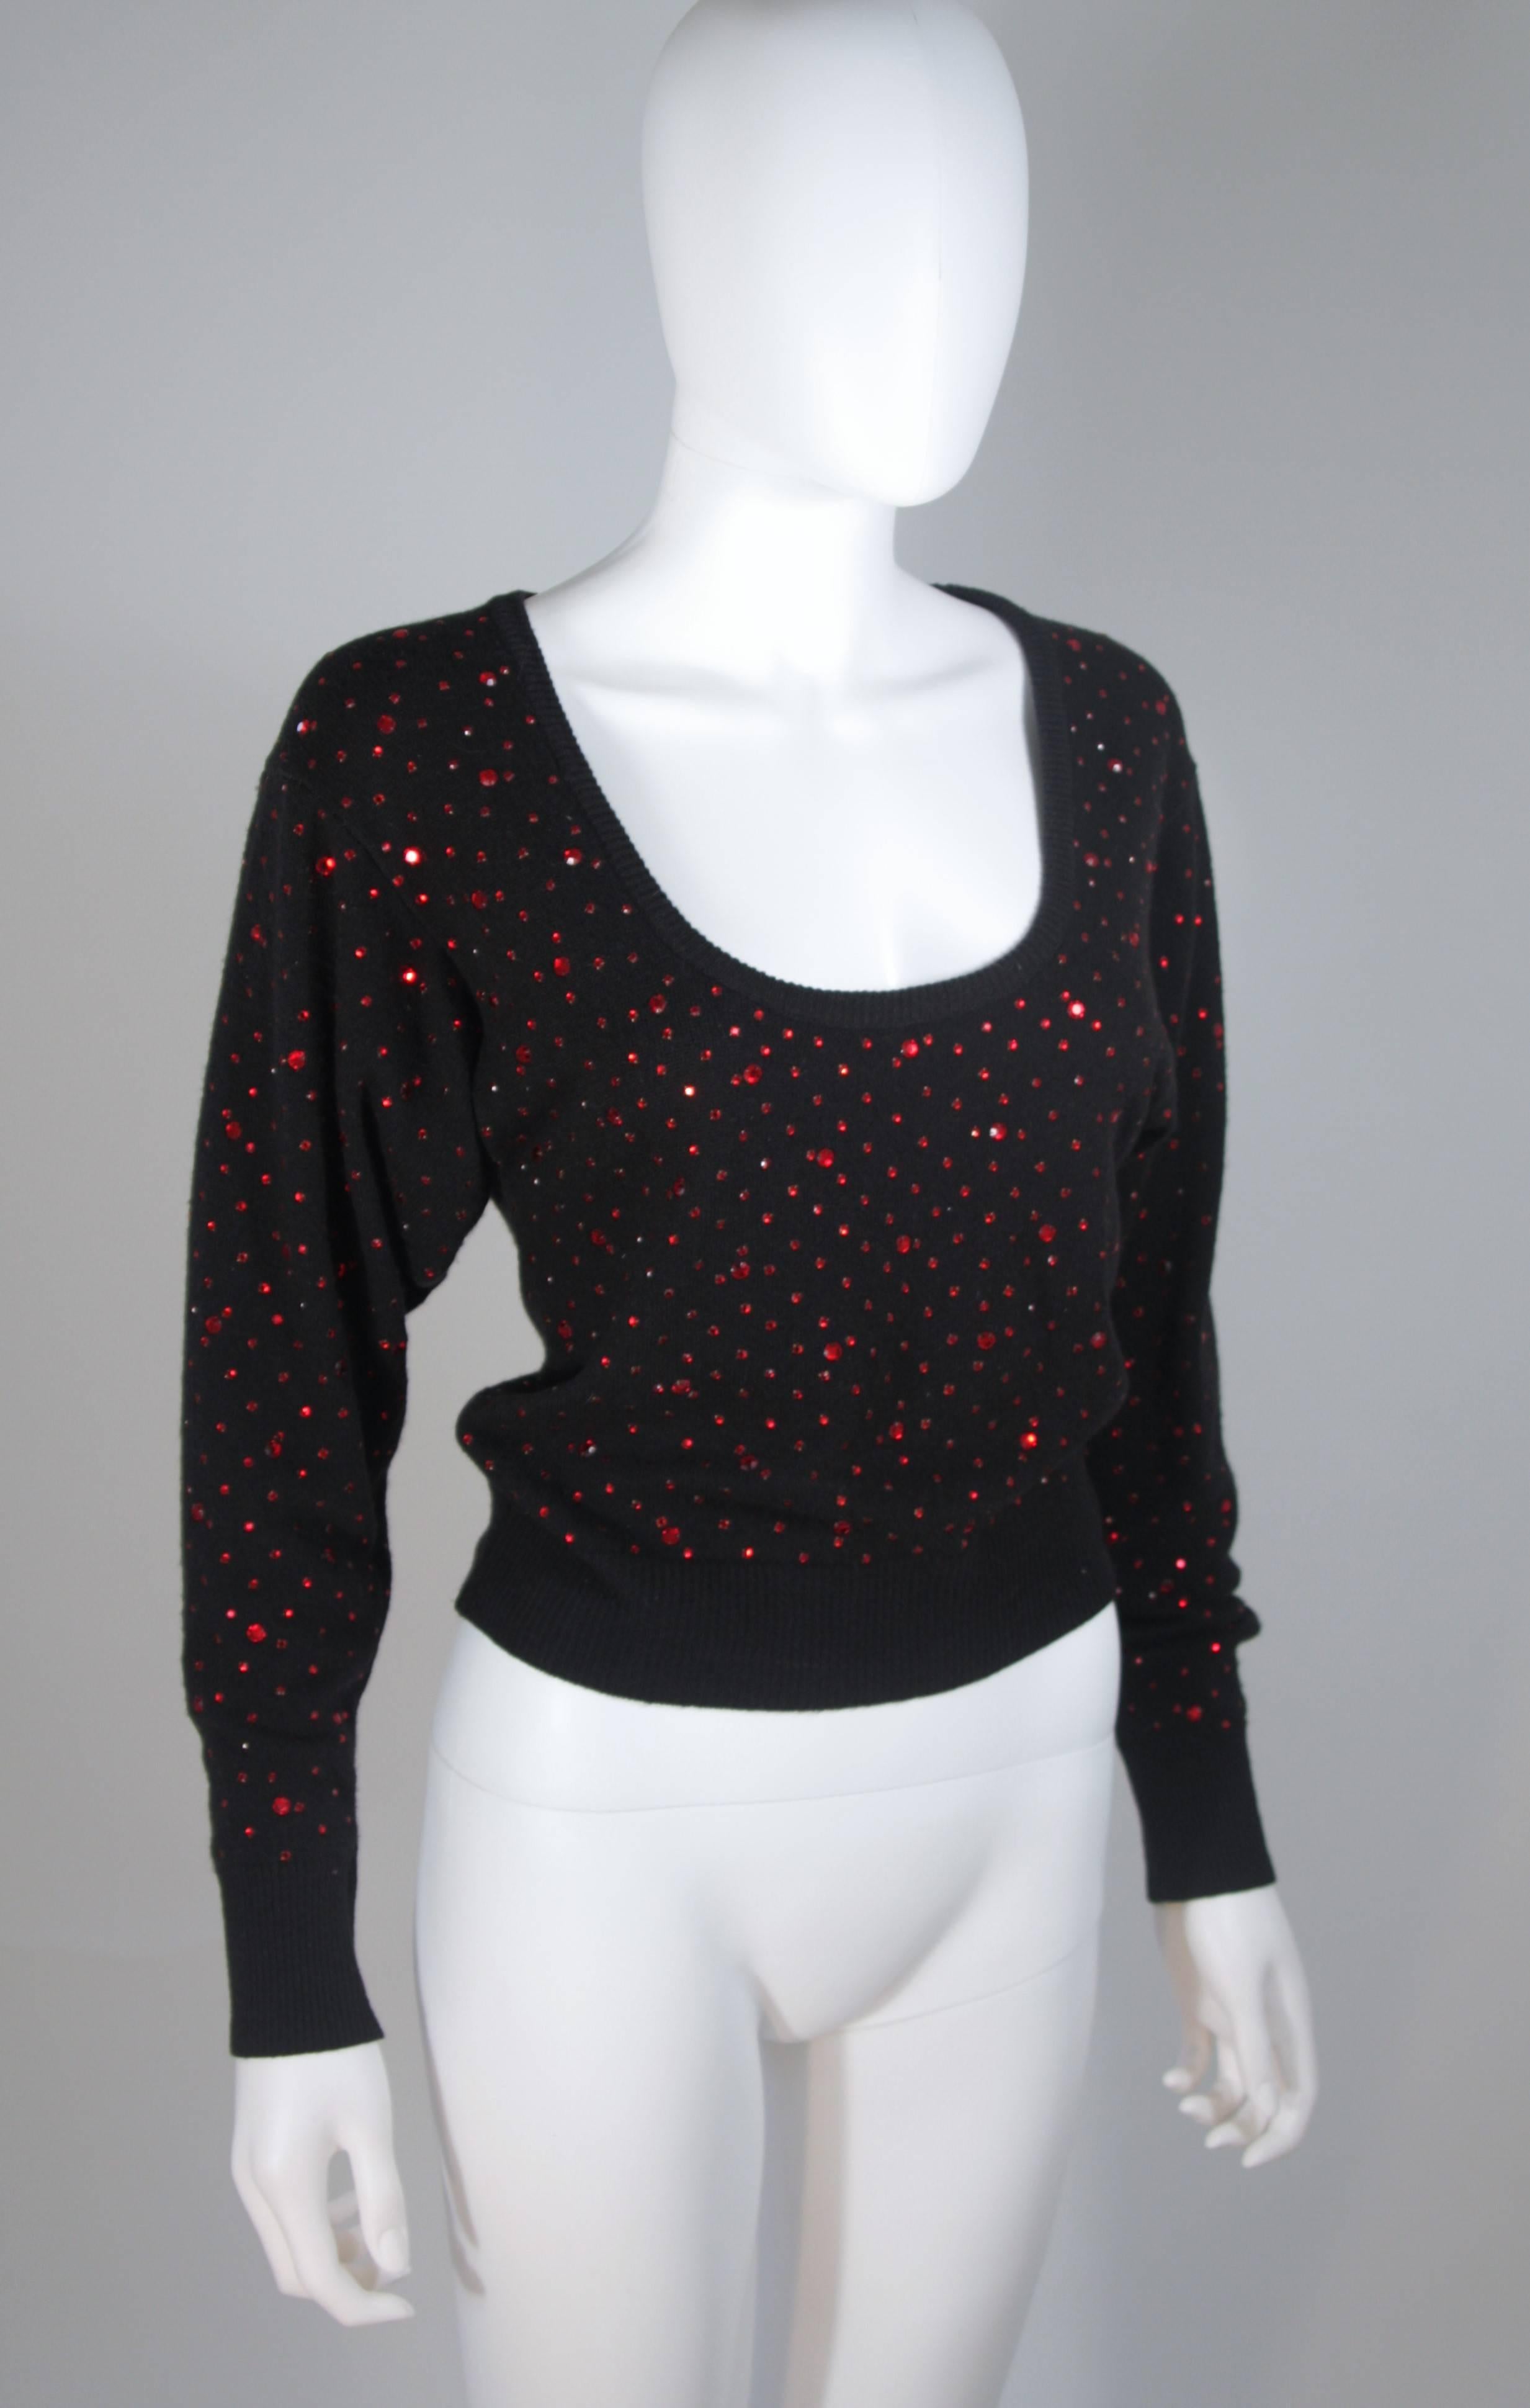 NEIMAN MARCUS Black Wool Knit Sweater with Red Rhinestone Applique Size M/L In Fair Condition For Sale In Los Angeles, CA